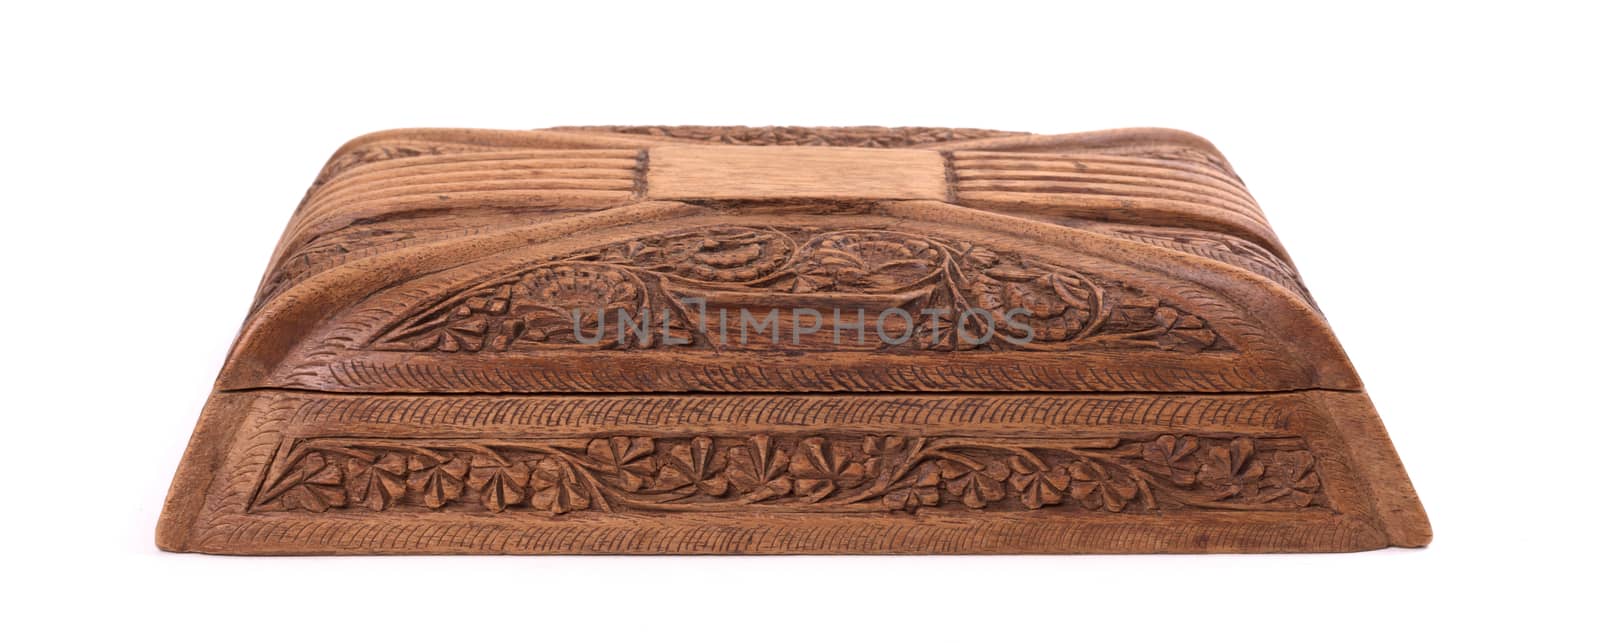 Old wooden cigarette case, isolated on white